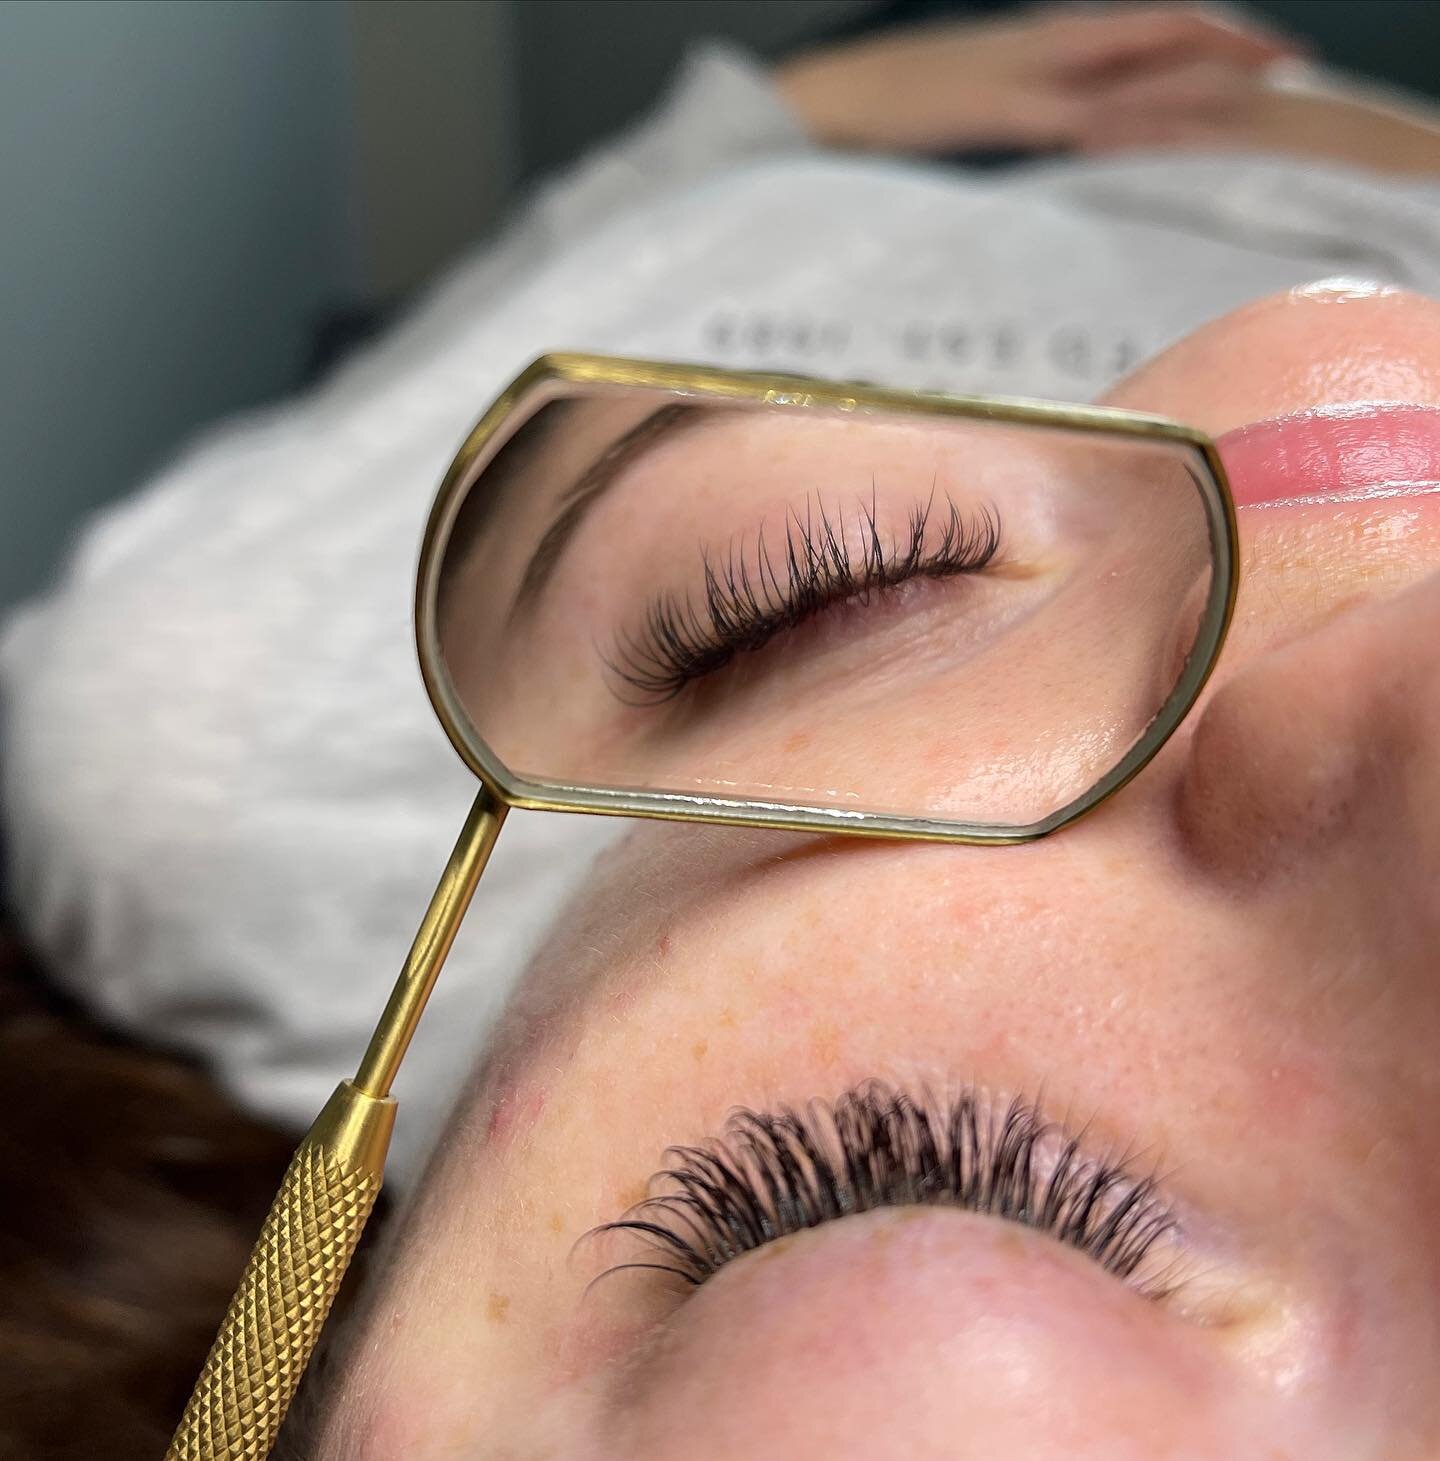 Classic baby 
-
By Teal @trends_by_teal 
-
TEXT TO BOOK 302-379-7876
-

#delawaresalon #teasesalonde #delawarelashes #delawarelashtech #delawarelashextensions #delawarelashartist #delawarelash #lashextensions #lash #lashes #lashartist #lashtech #lash